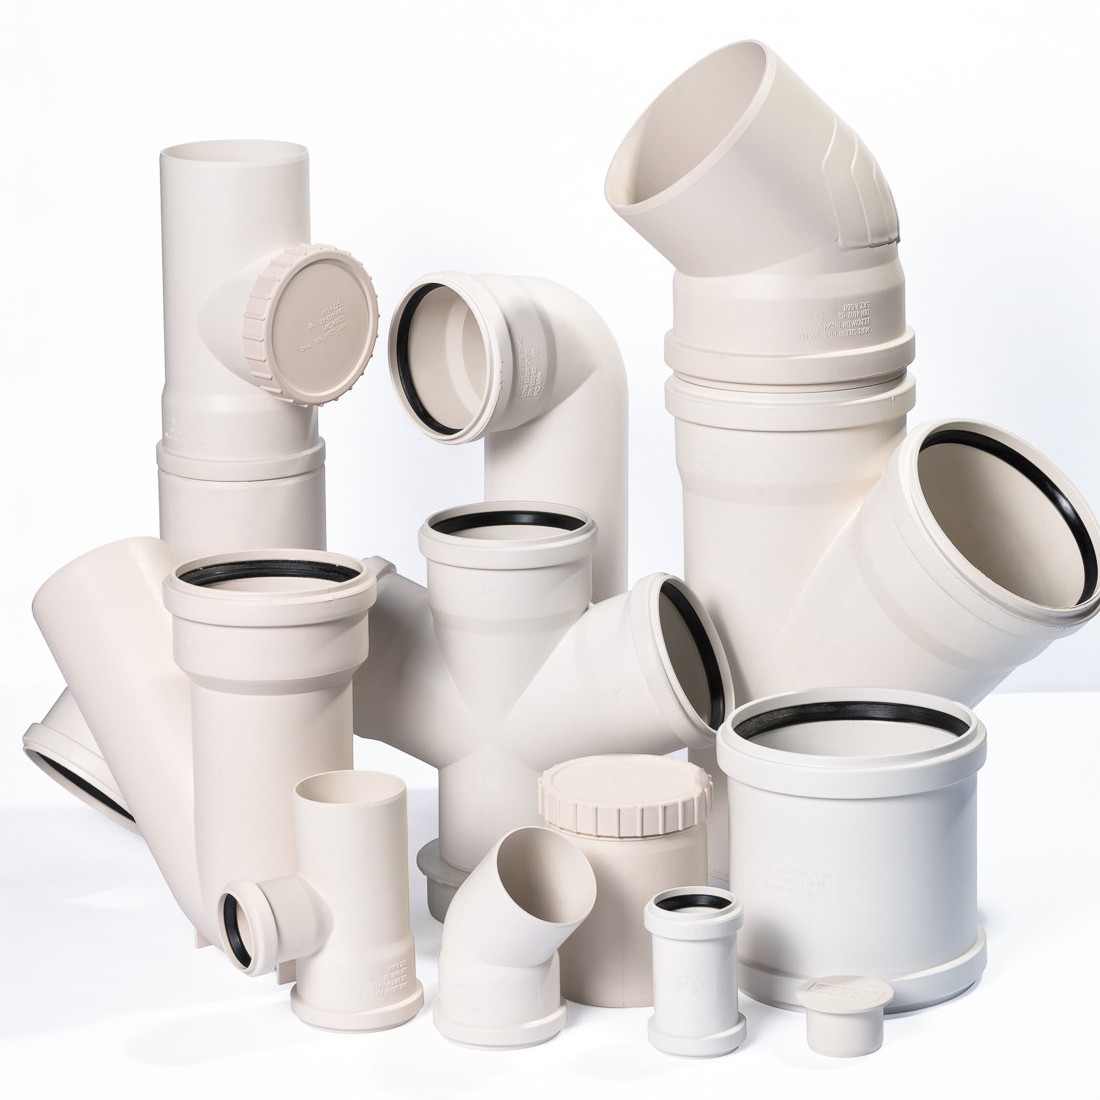 Silent Sewage pipes and fittings